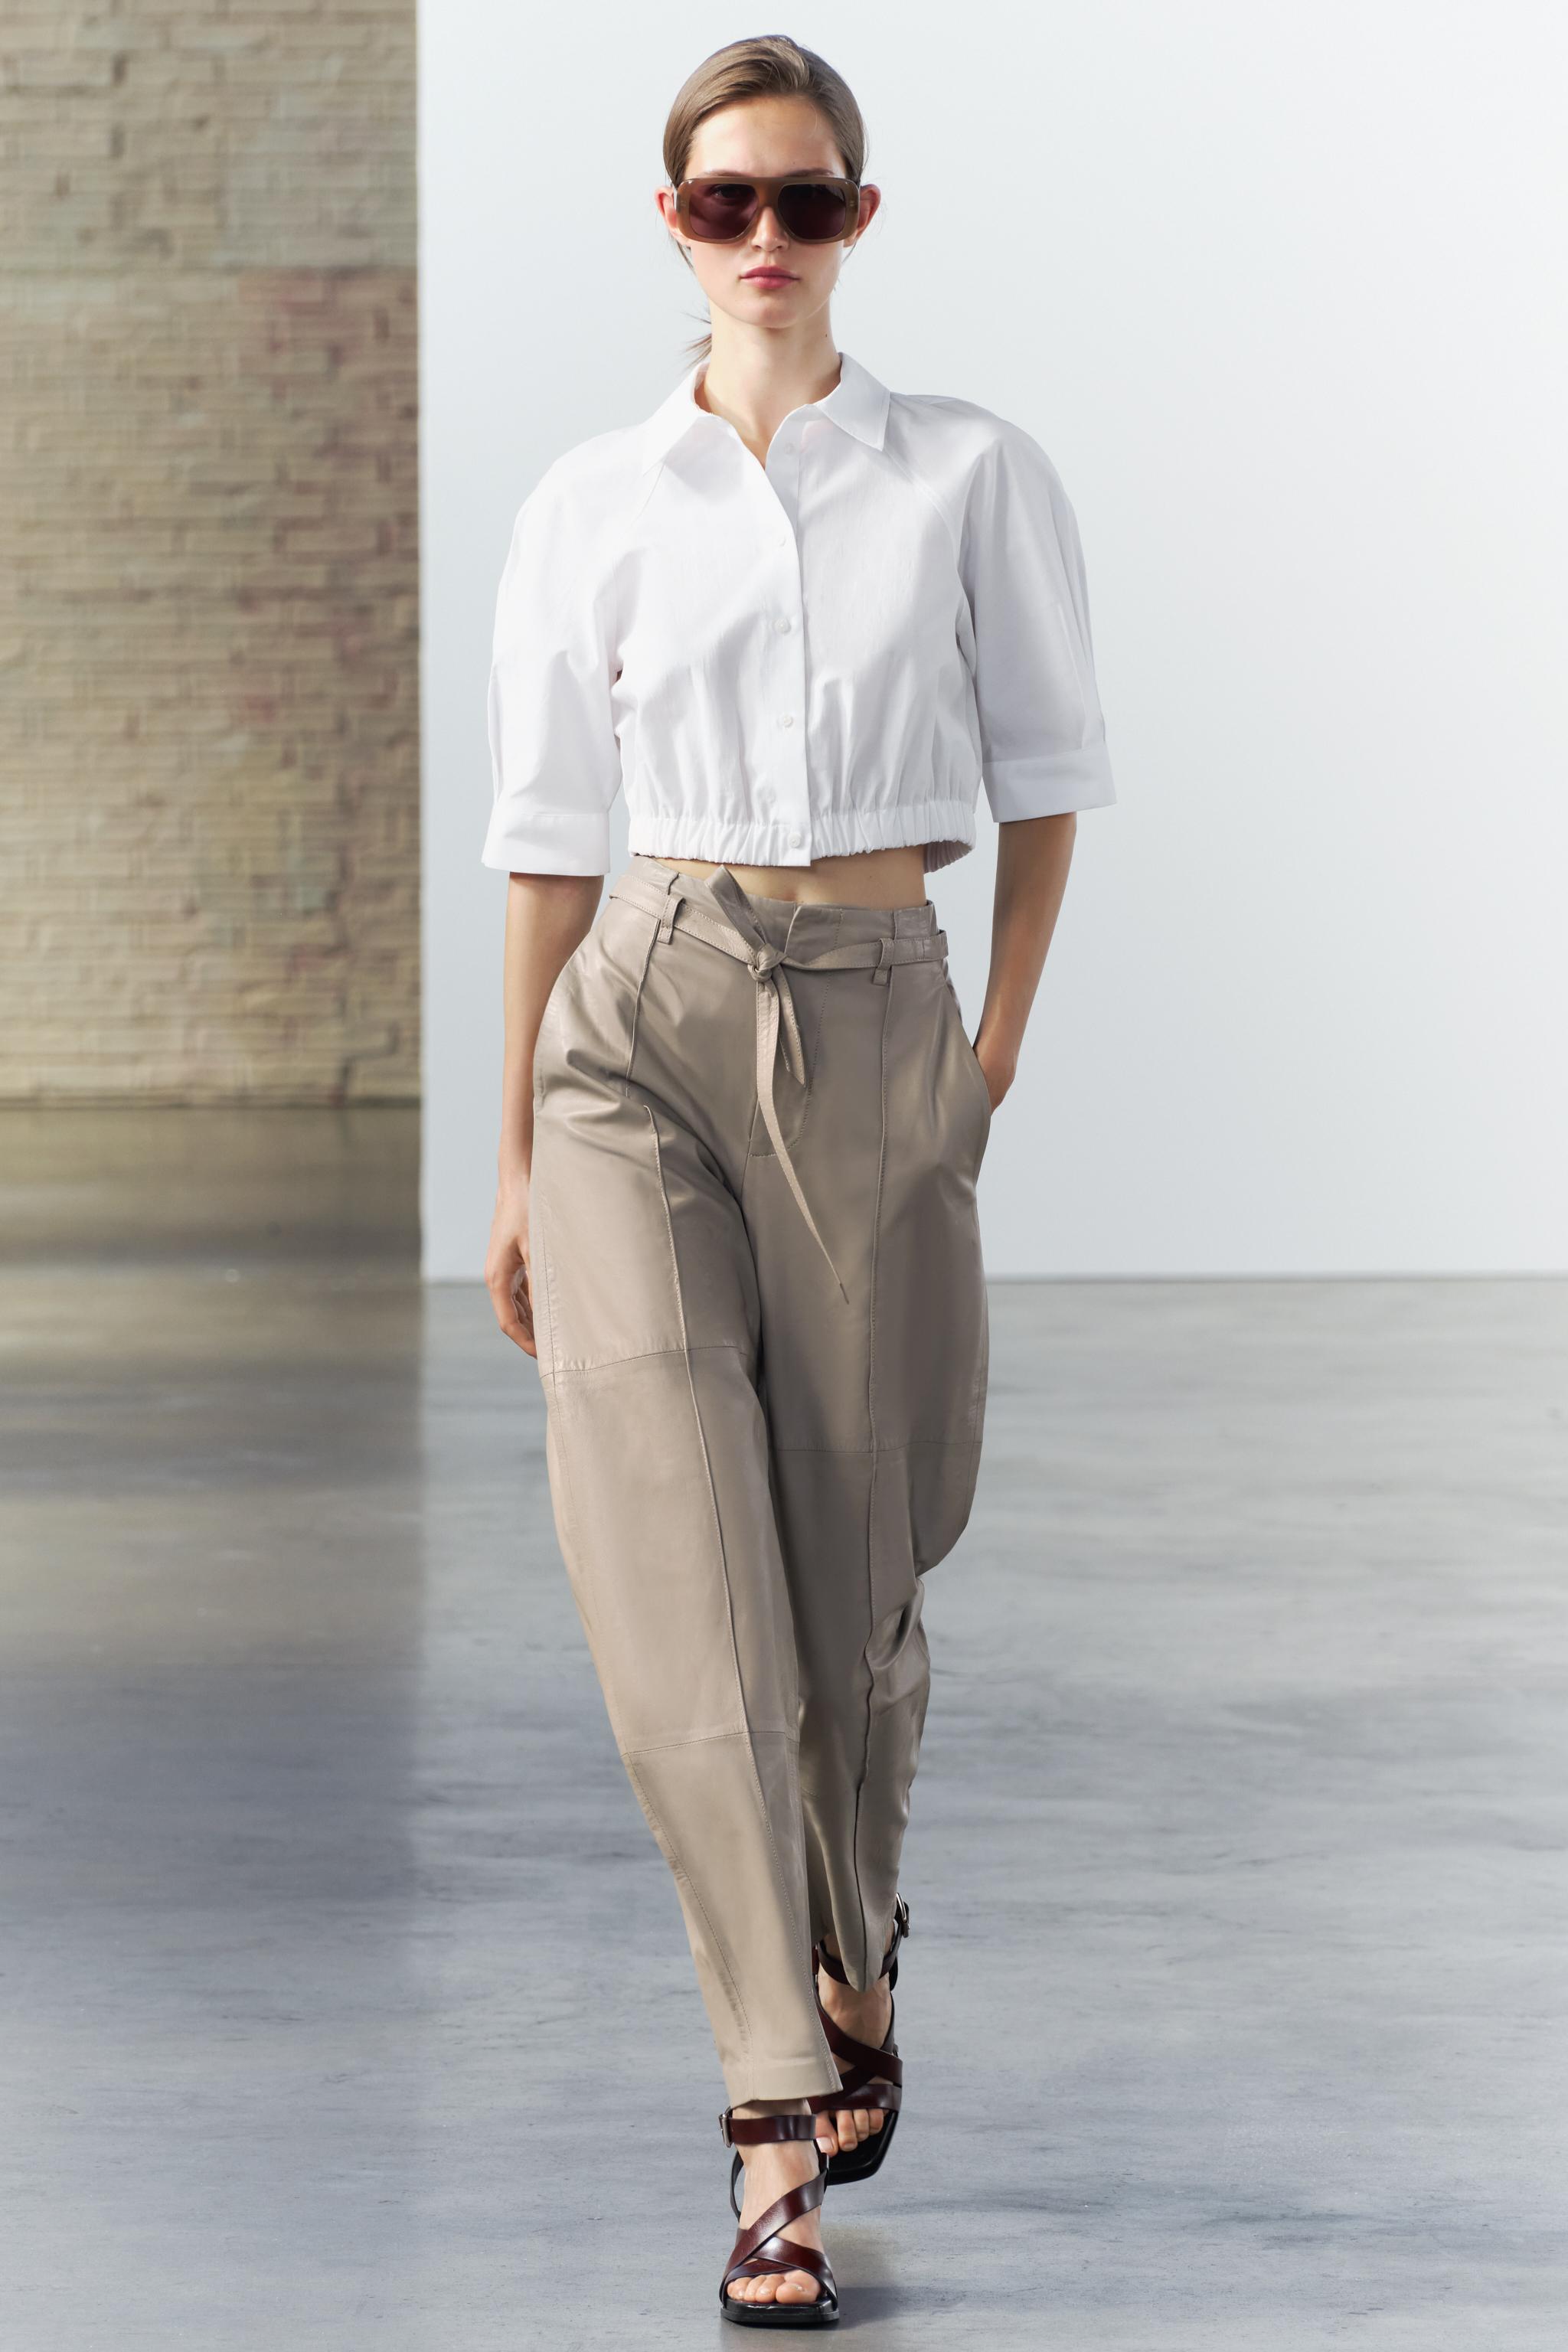 ELASTICIZED CROPPED SHIRT ZW COLLECTION